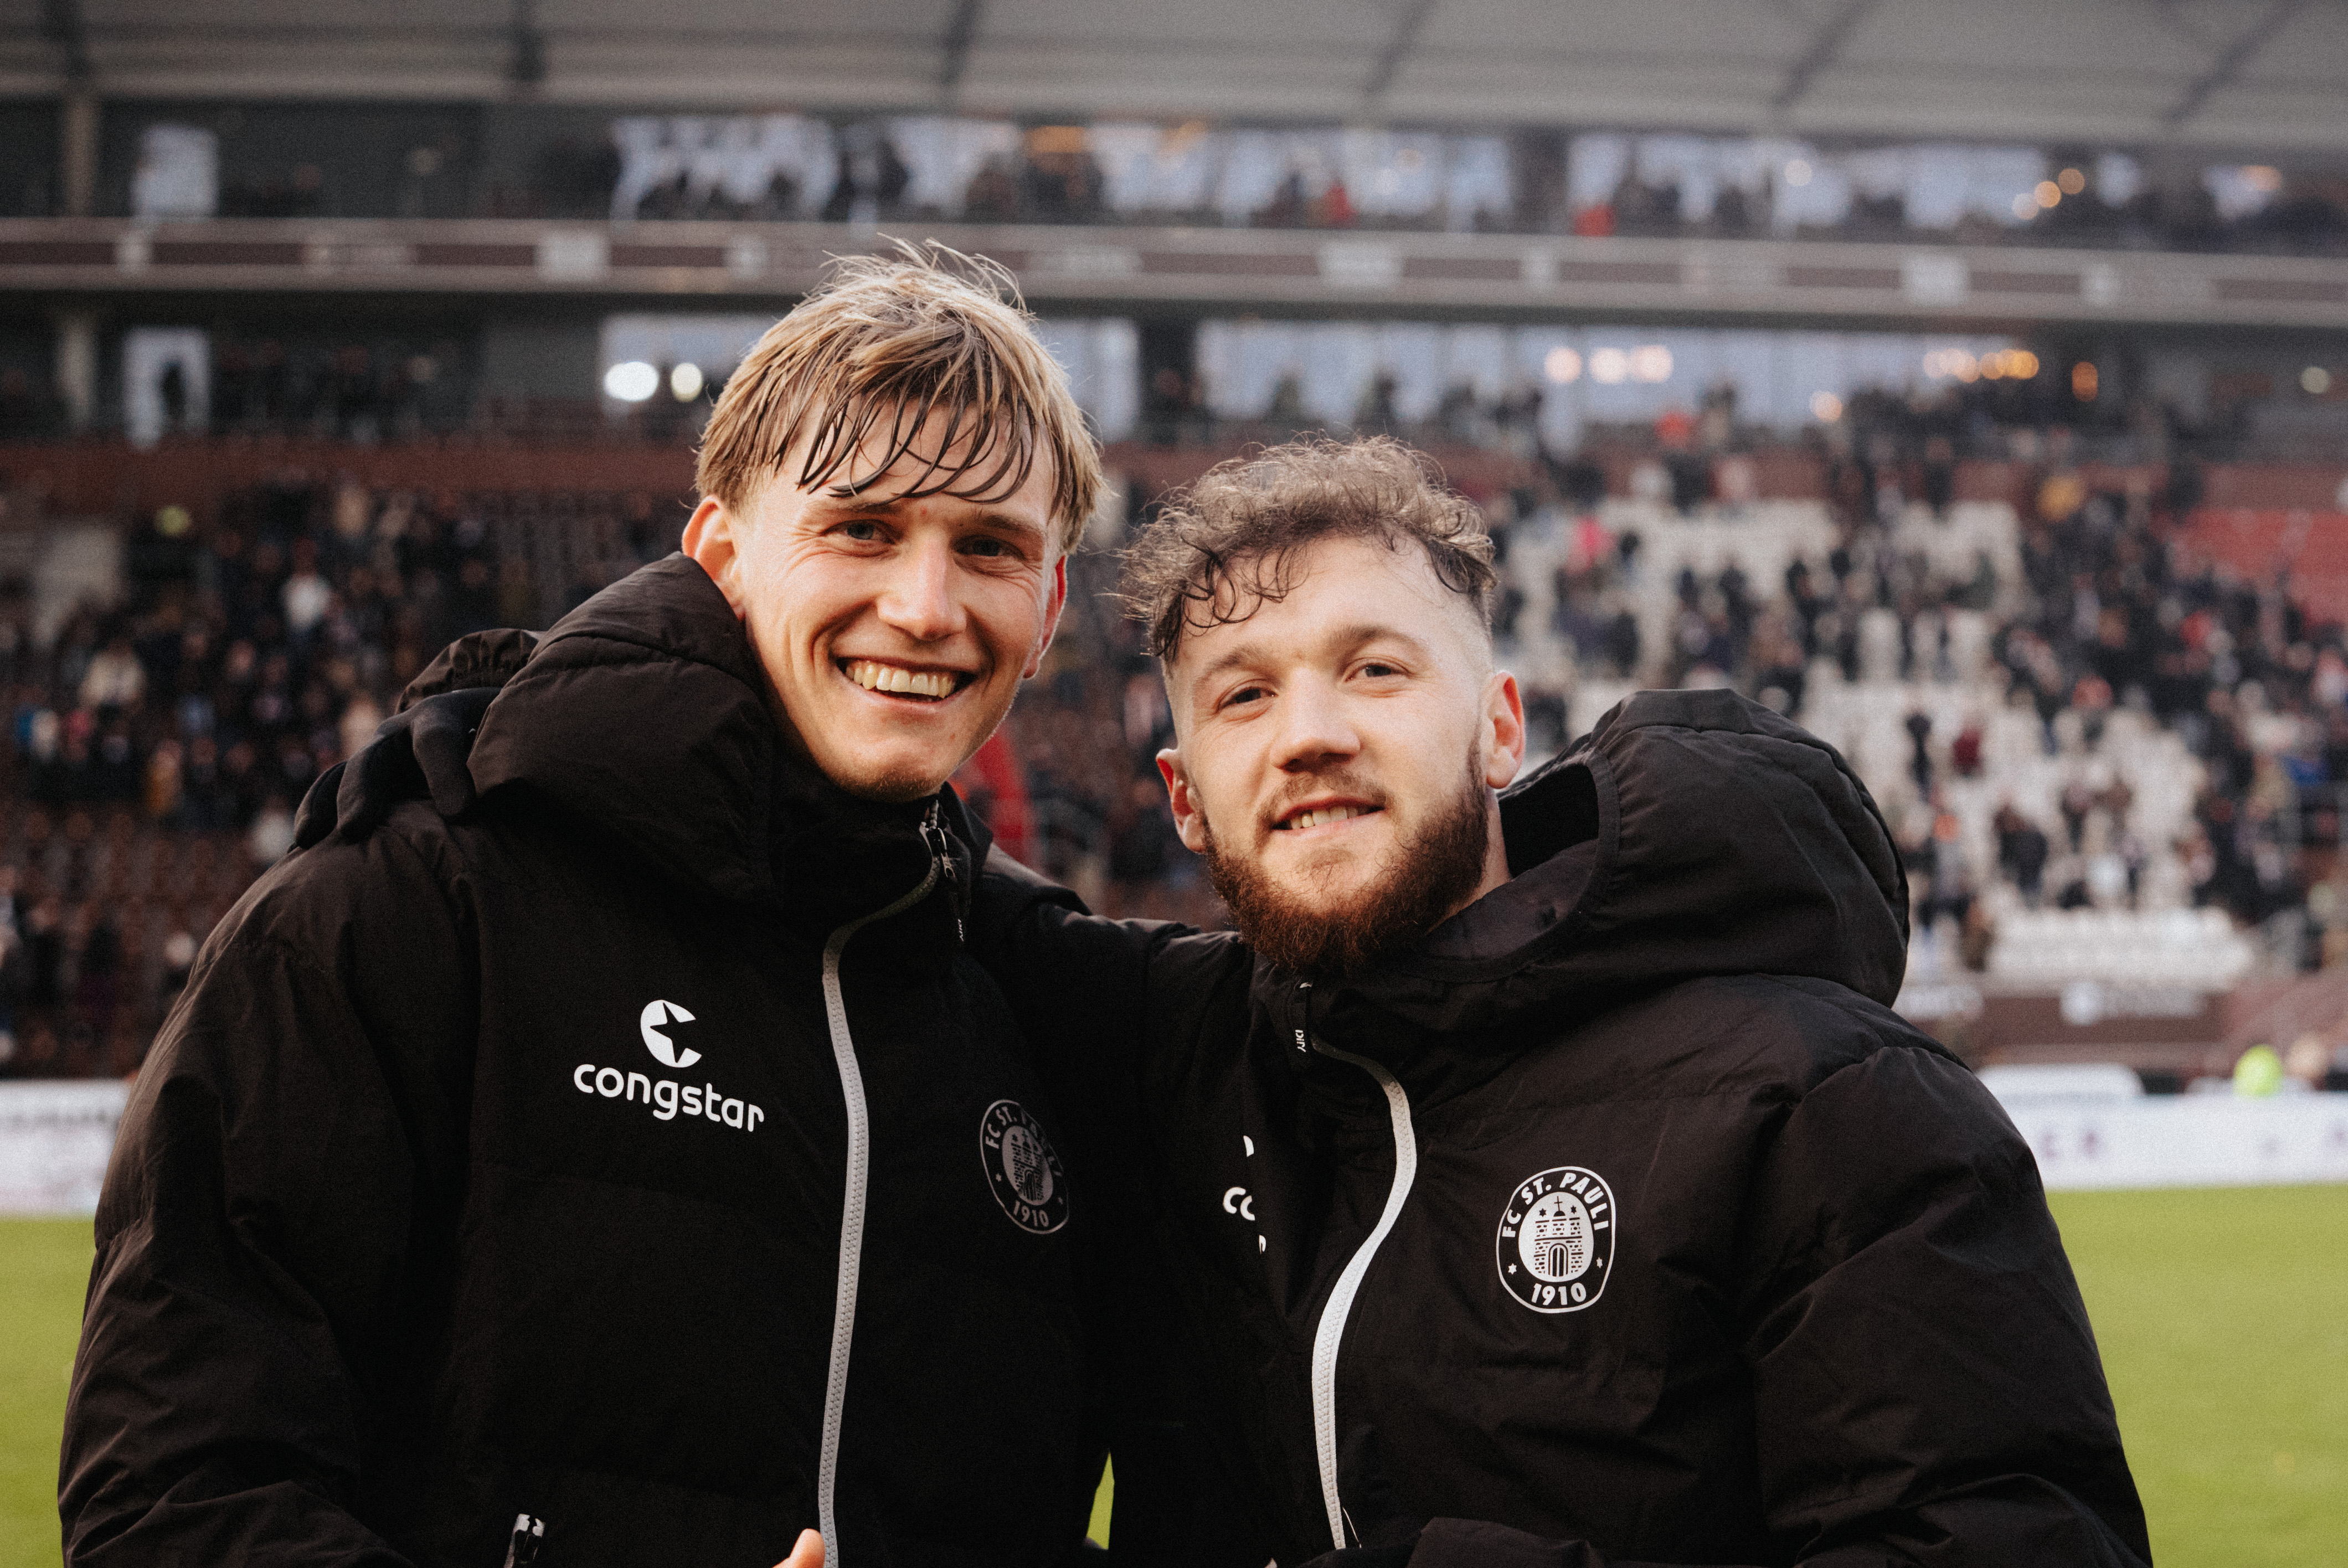 Aljoscha Kemlein (left) and Marcel Hartel team up well together on and off the pitch.